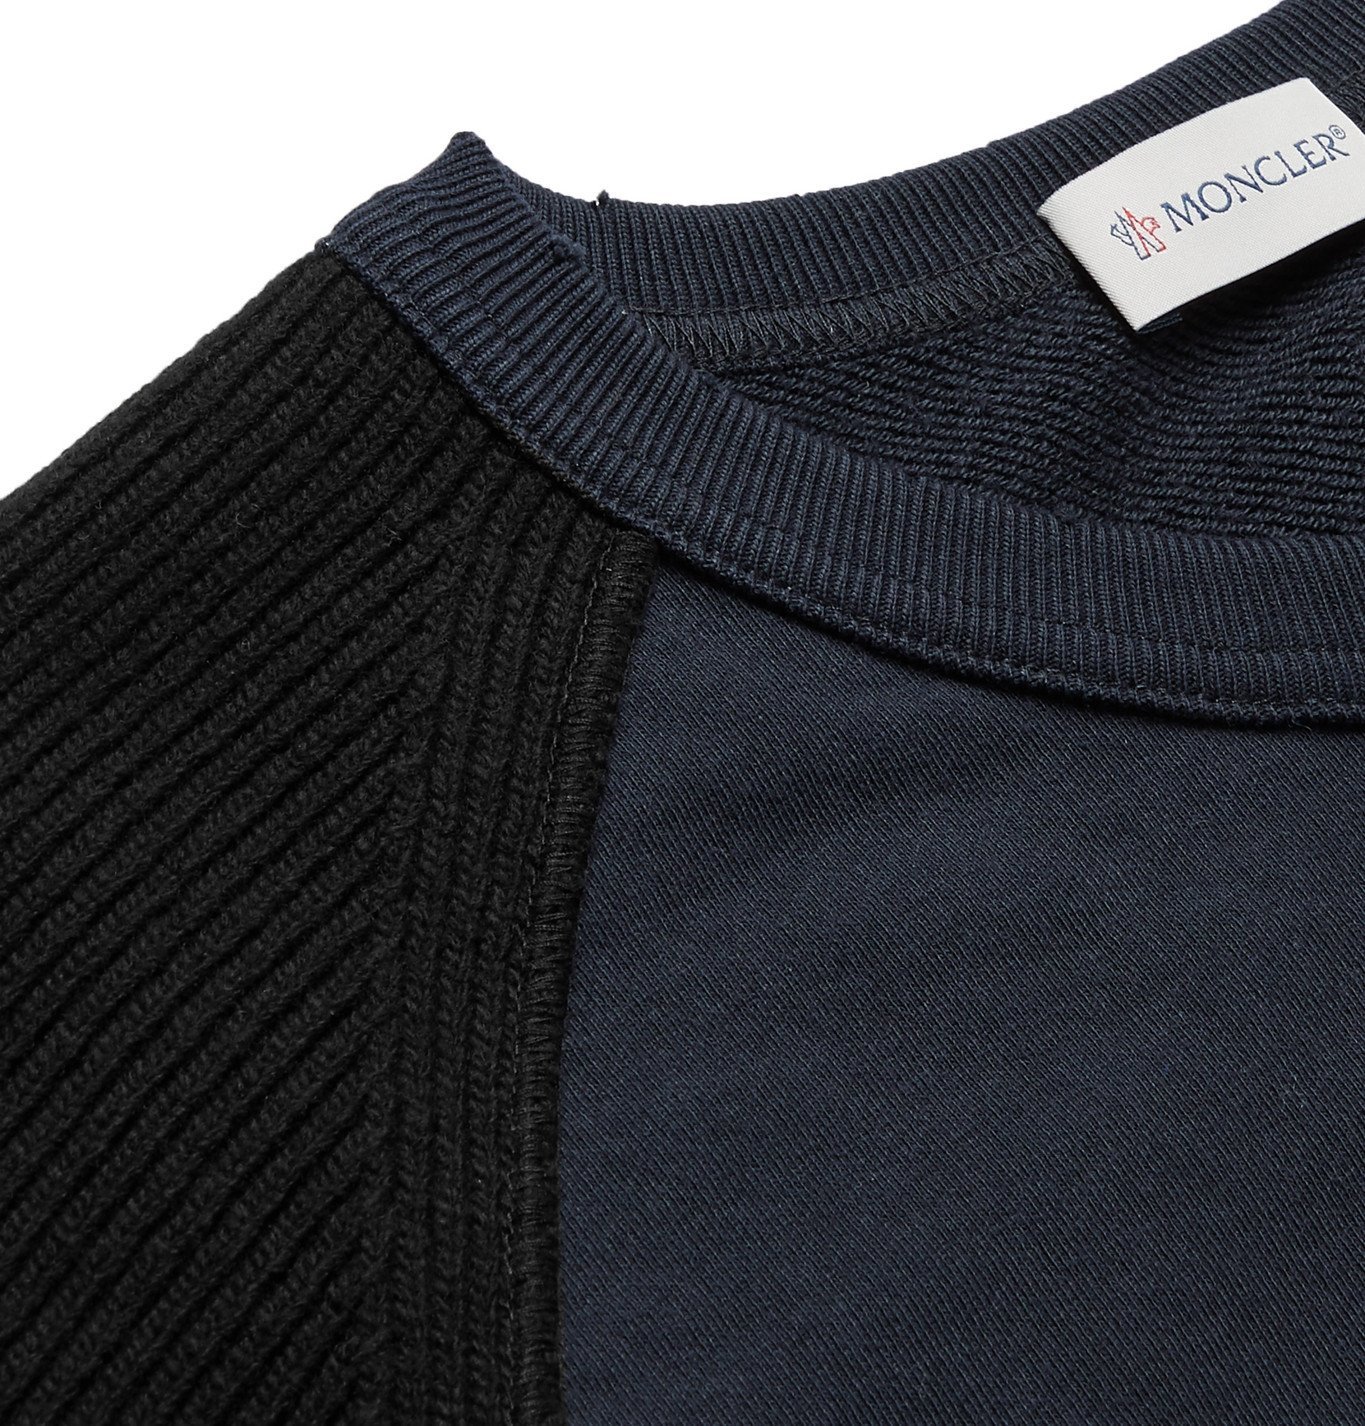 Moncler Genius - 1 Moncler JW Anderson Logo-Embroidered Virgin Wool and ...